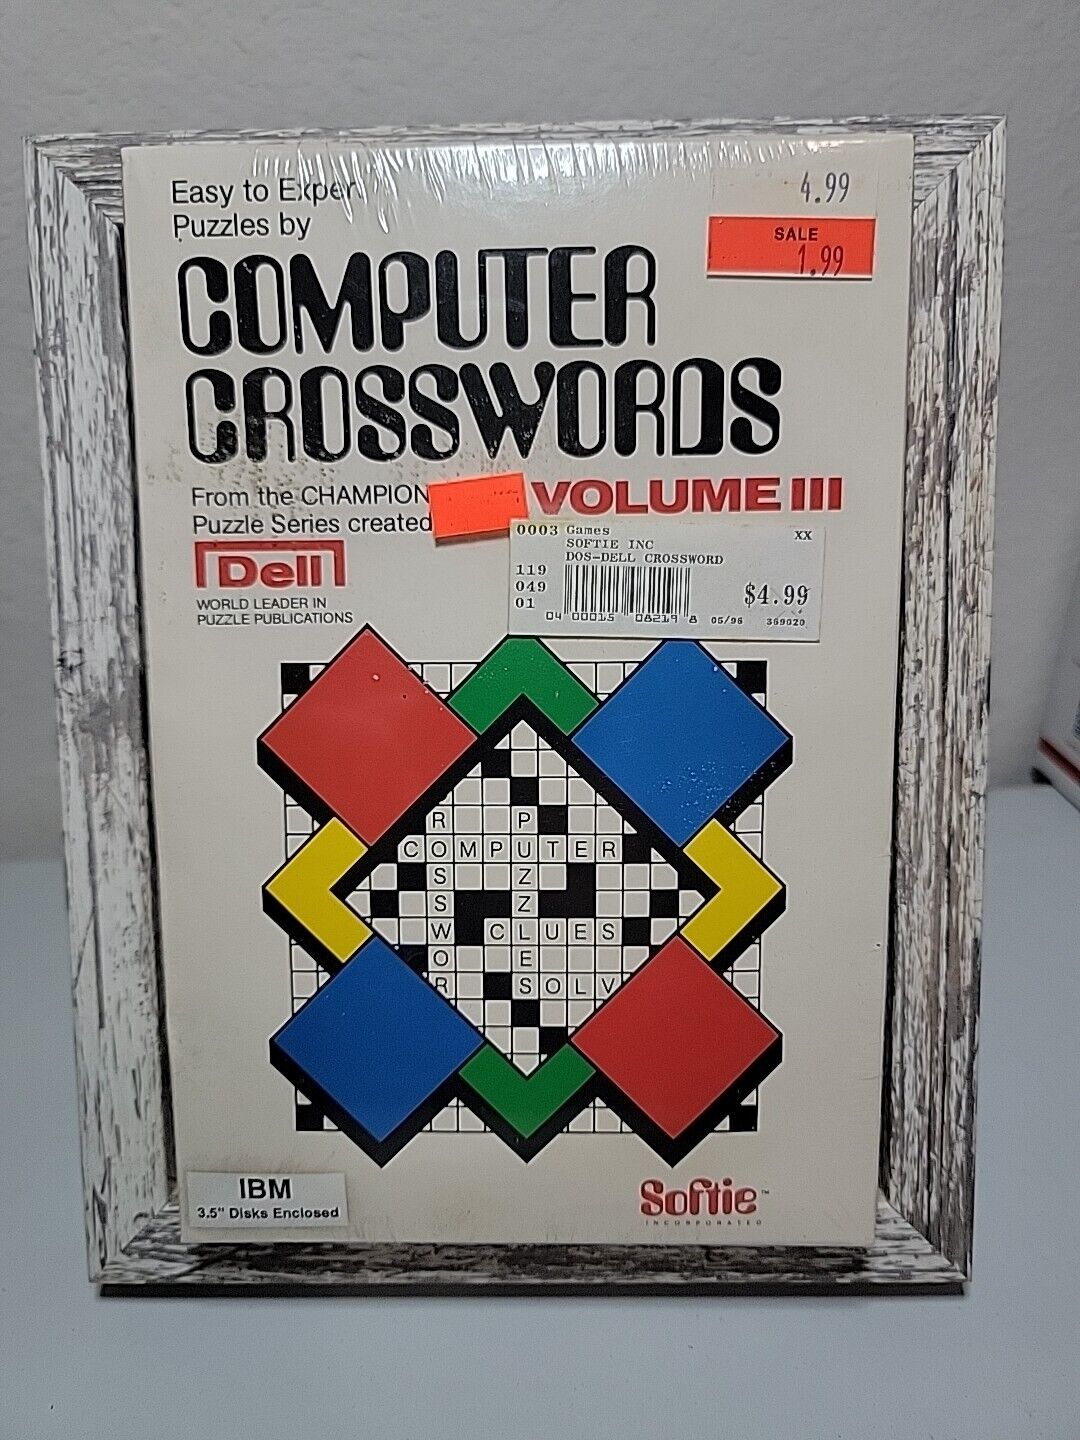 Vintage NIB Computer Crosswords Volume 111 created by Dell- 1984 BRAND NEW